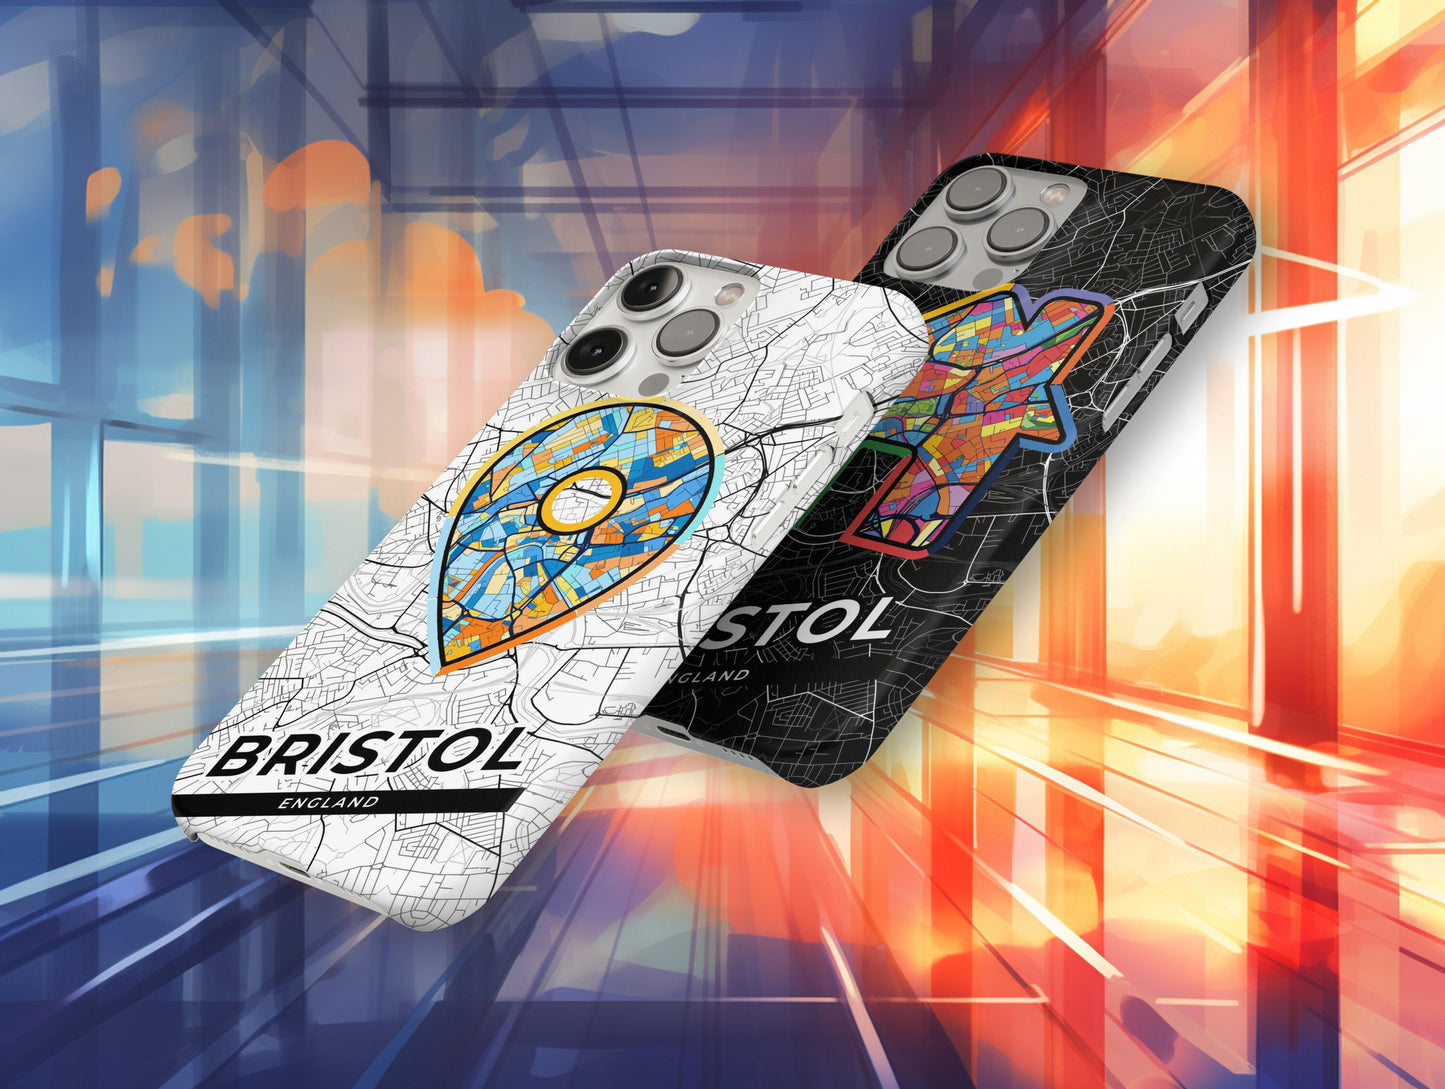 Bristol England slim phone case with colorful icon. Birthday, wedding or housewarming gift. Couple match cases.